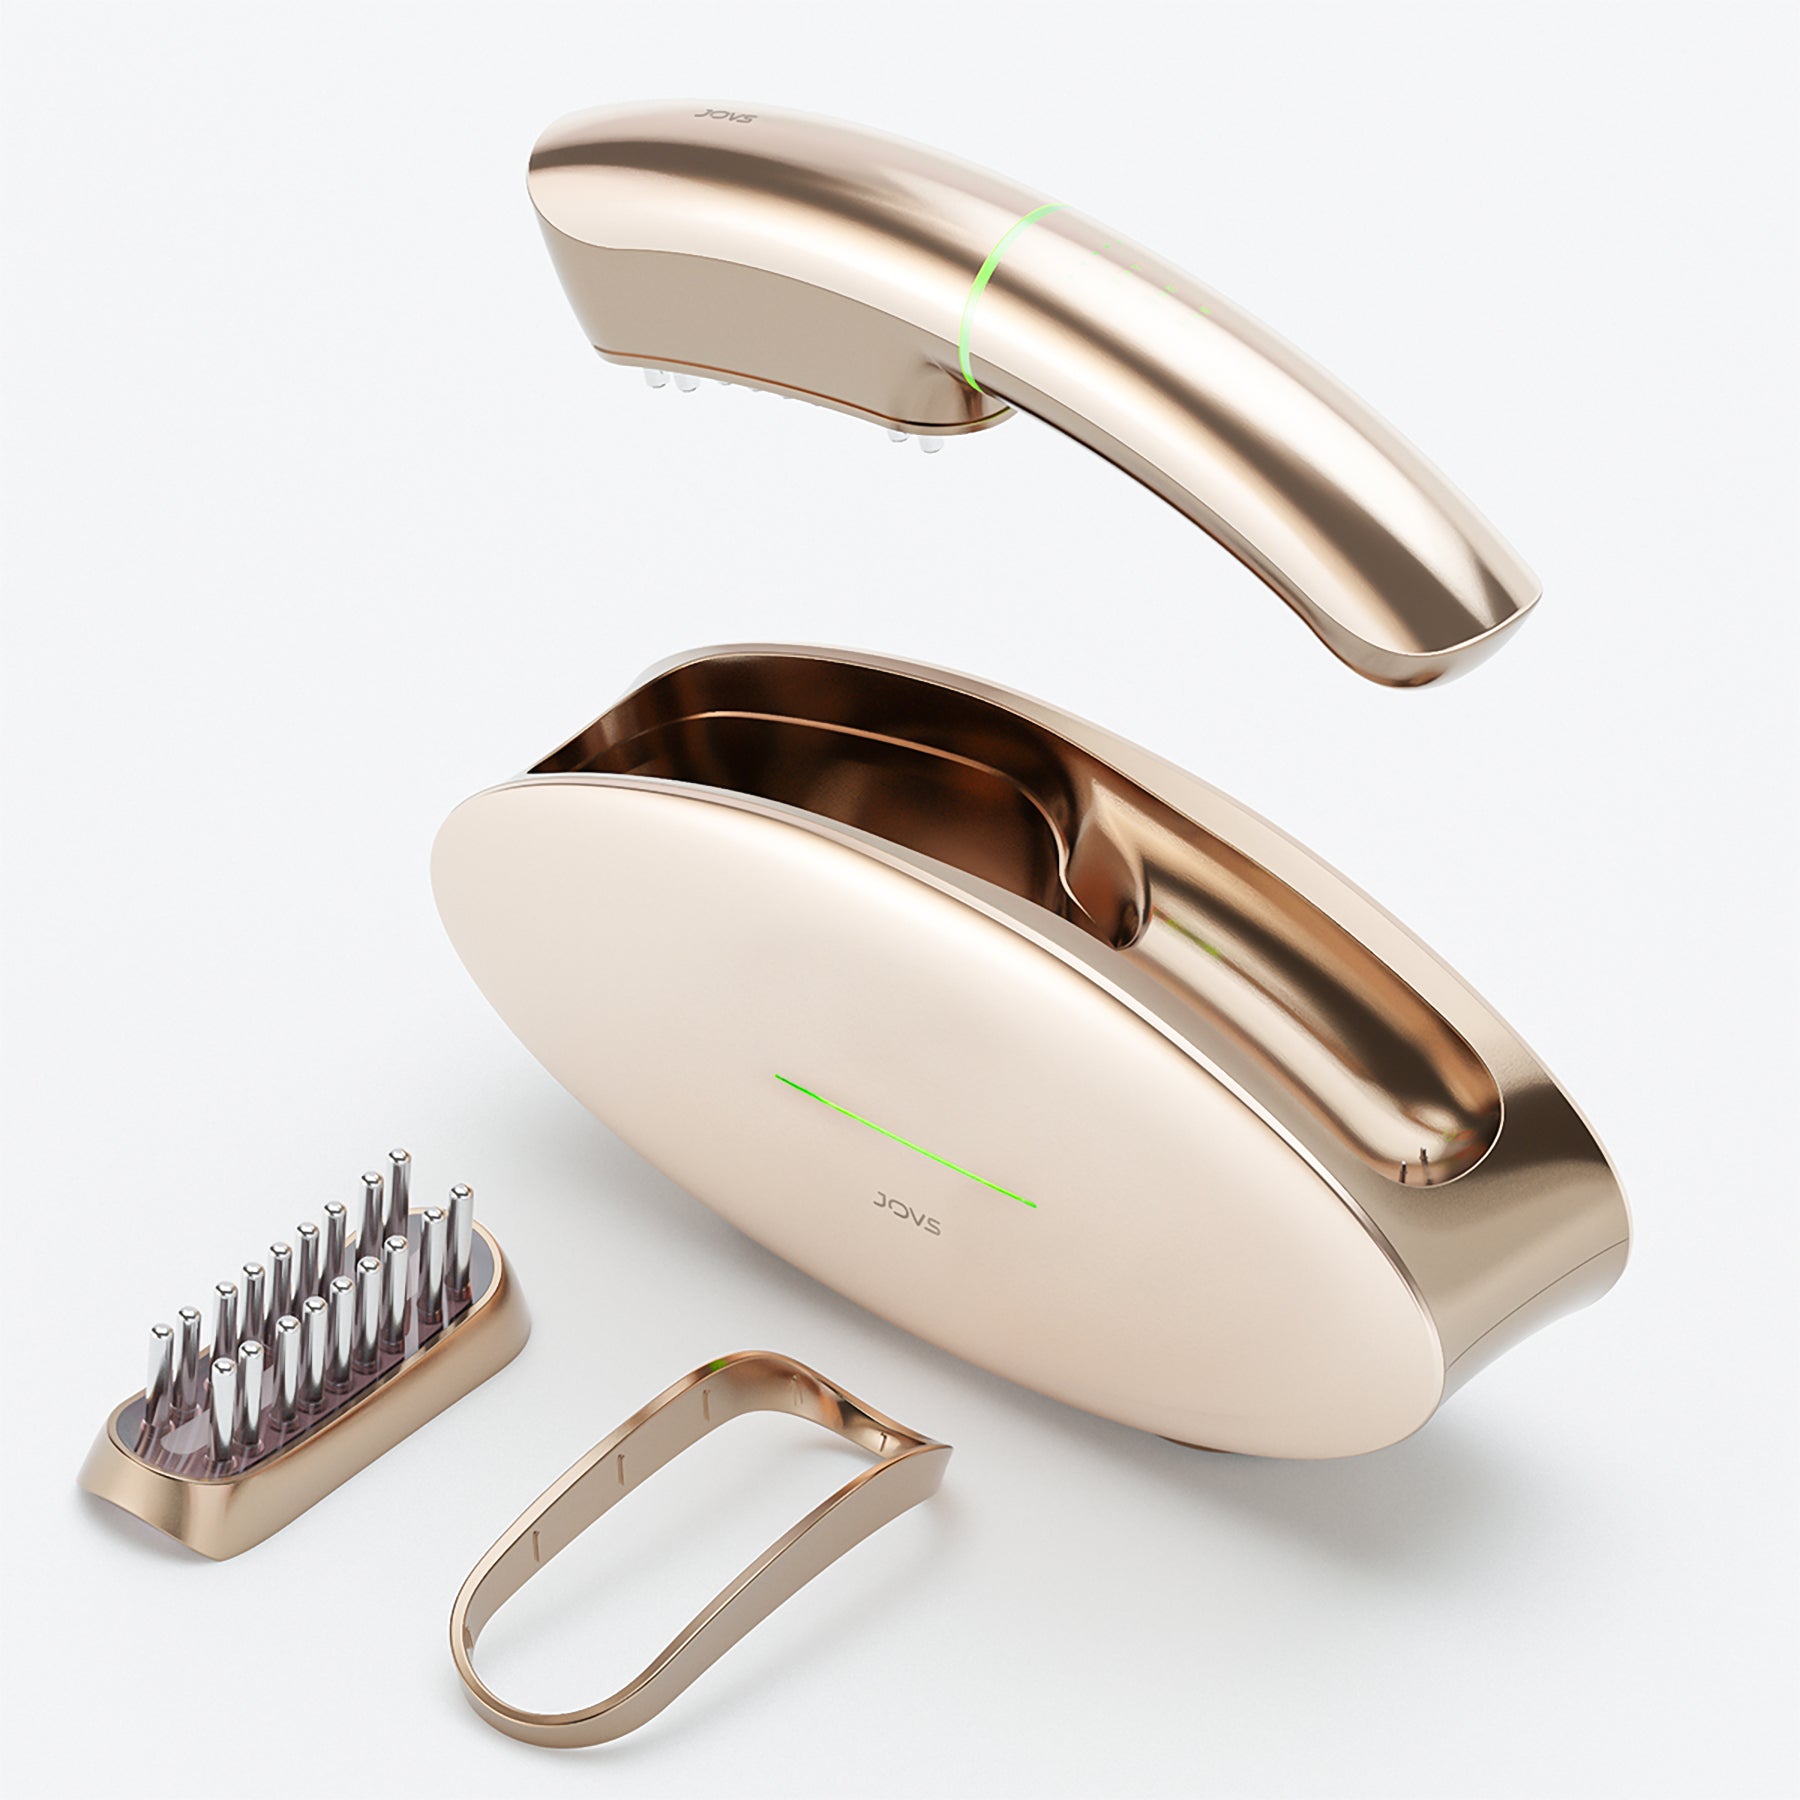 JOVS Slimax Full-Body Microcurrent Anti-Aging Device with Accessories in Stylish Rose Gold.